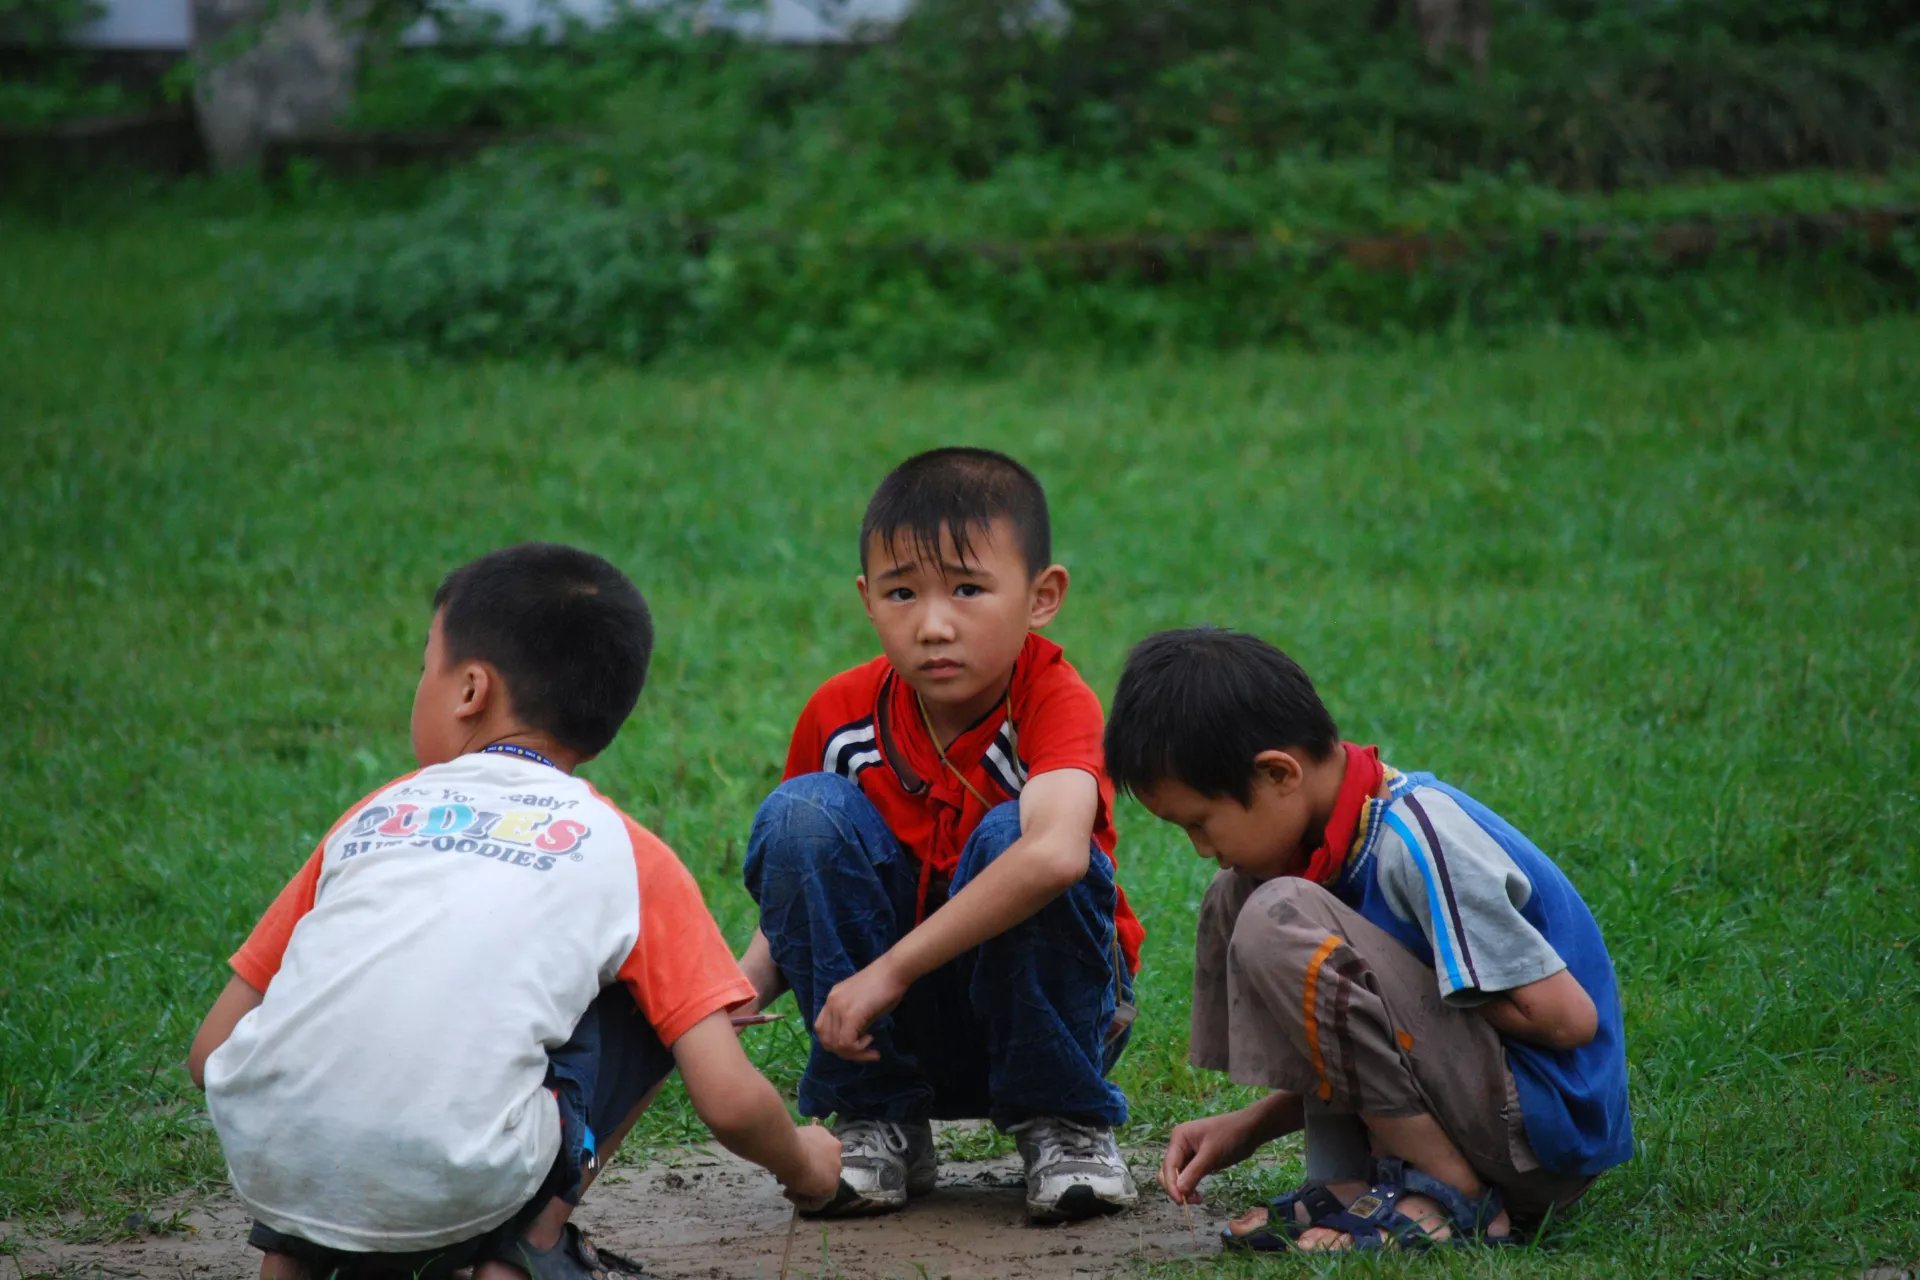 Huang Huijie(middle) plays with his friends at the playground during a recess.